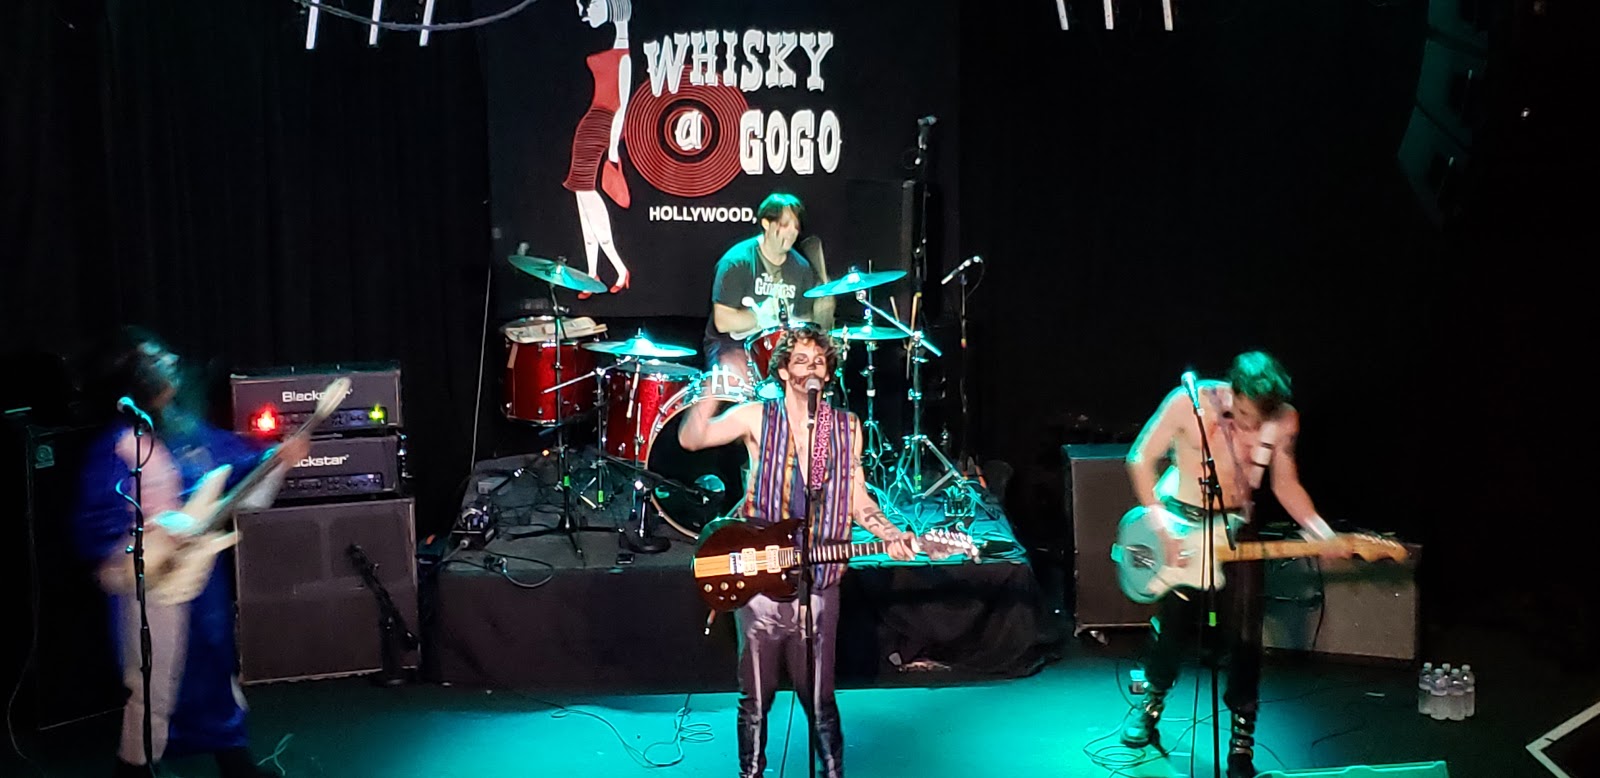 Member Whisky a Go Go in West Hollywood CA